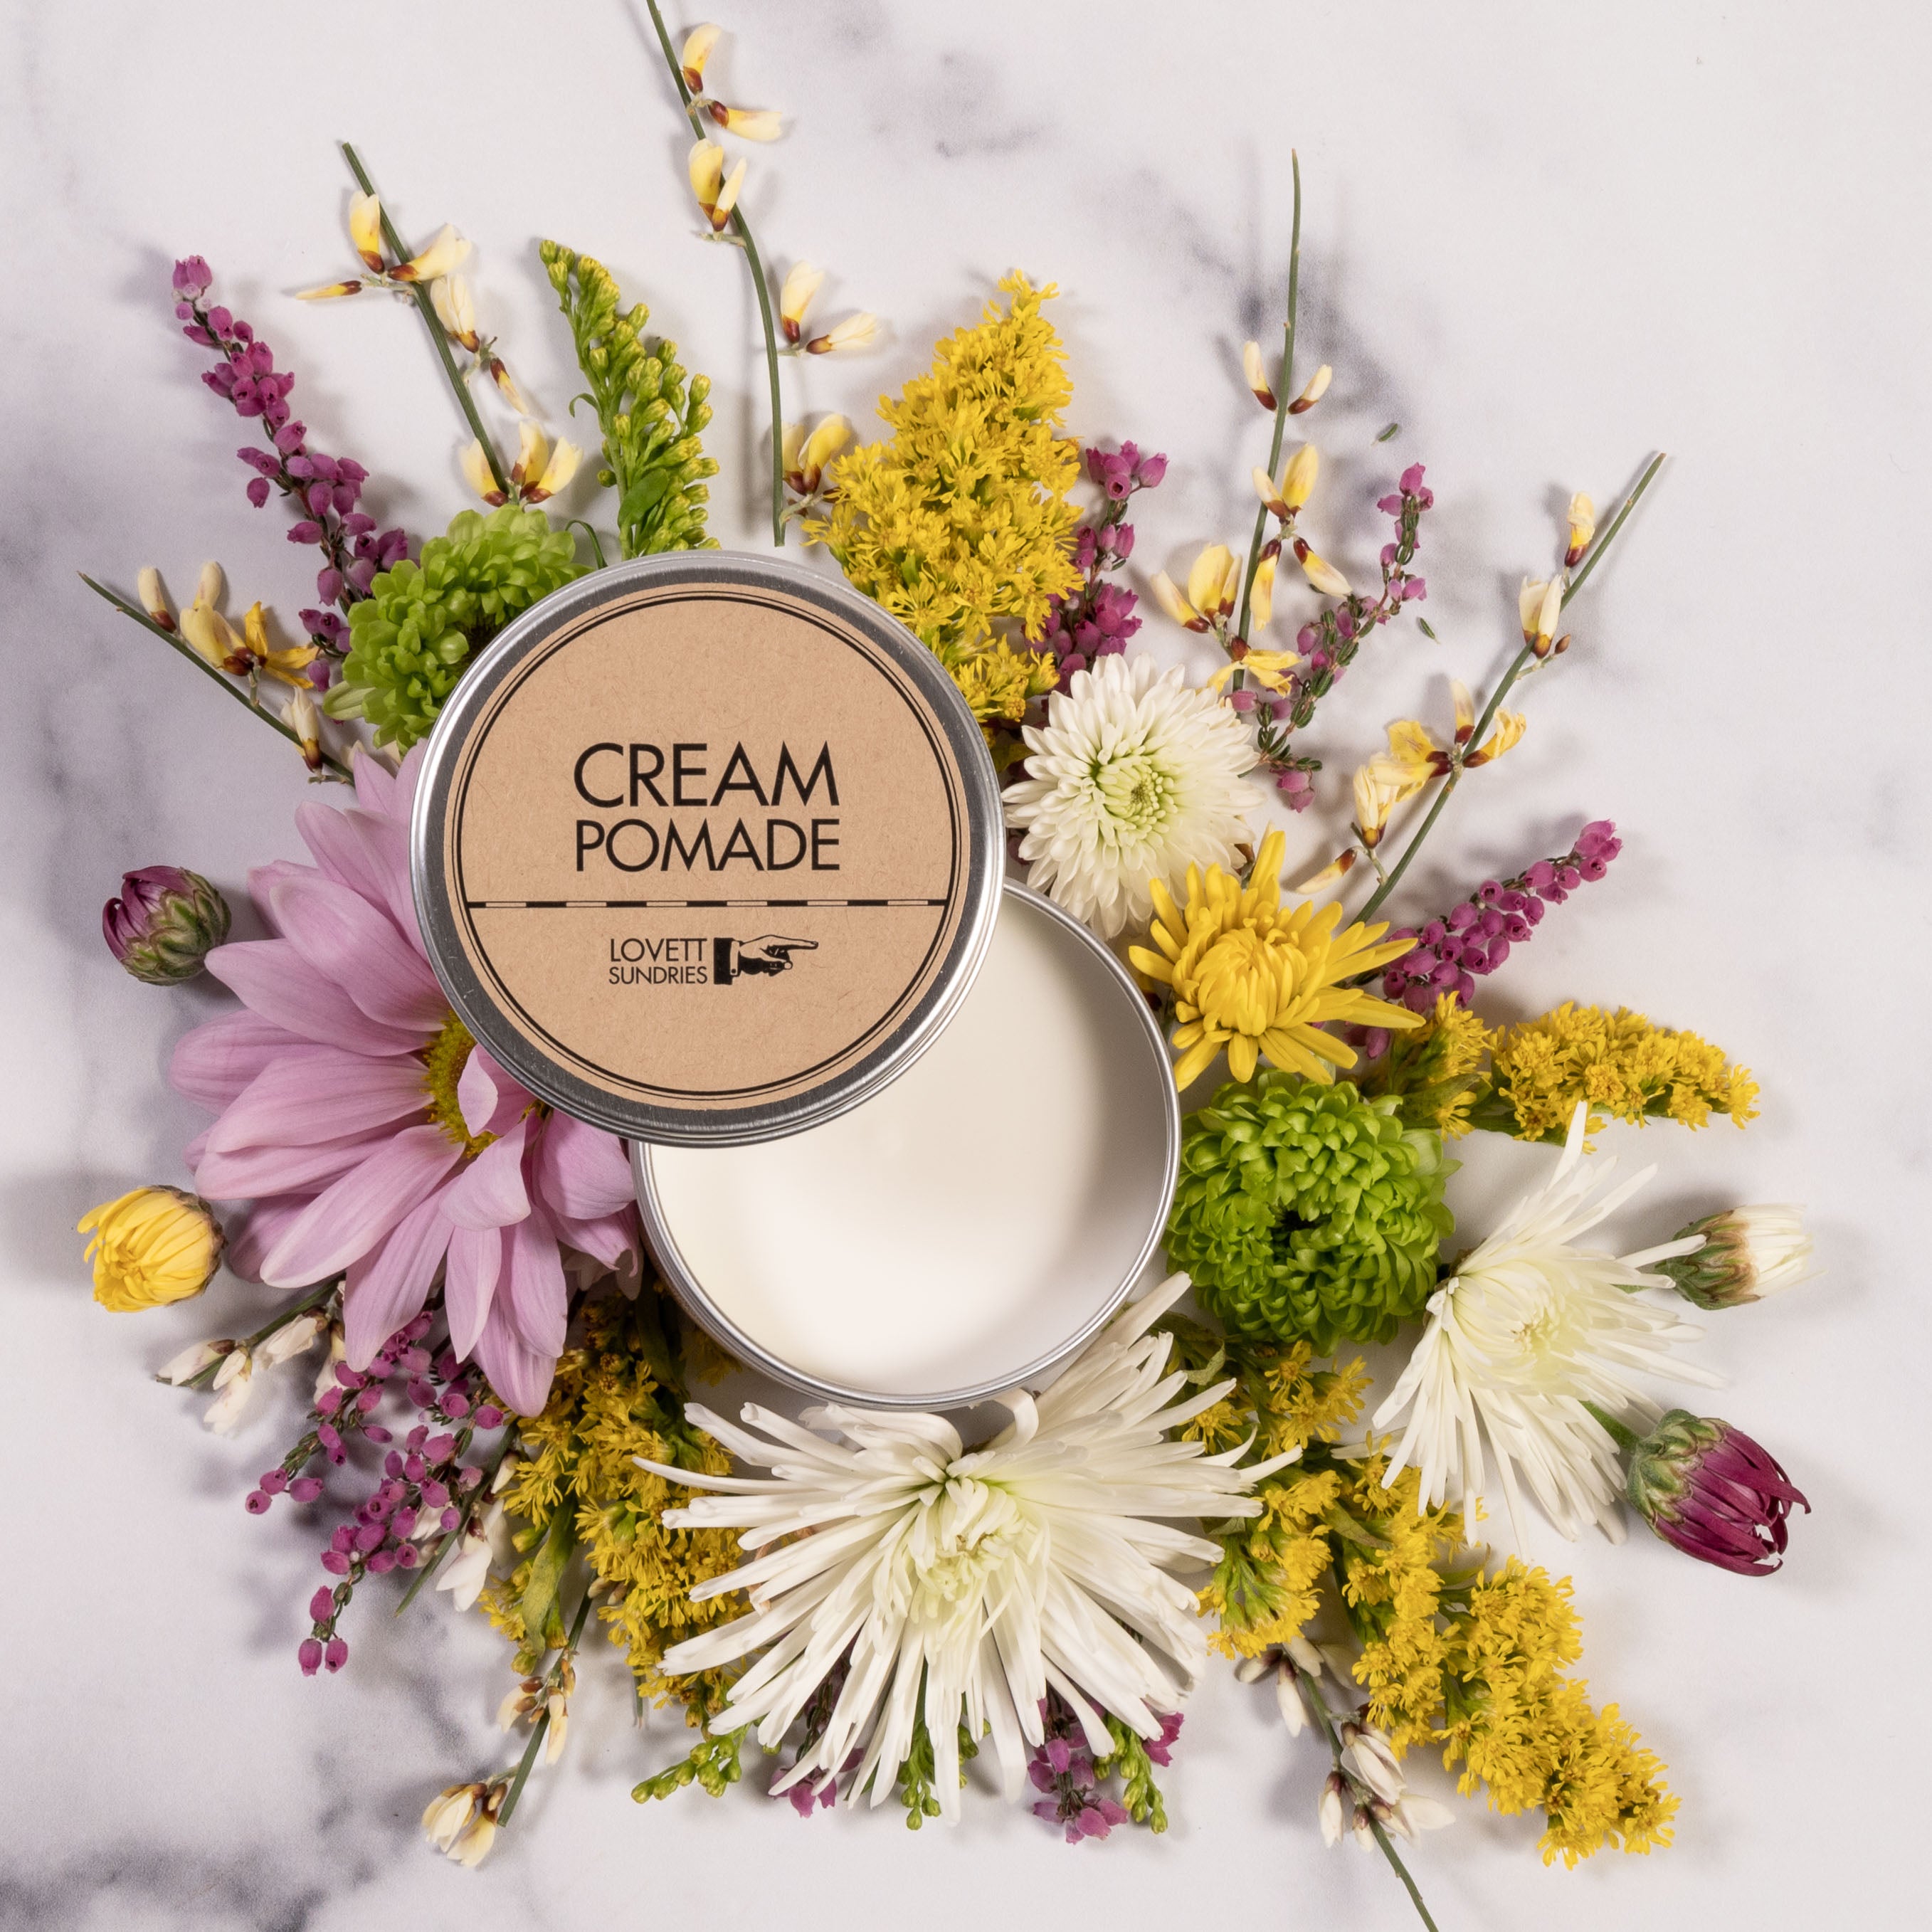 Cream pomade in a tin surround by colorful flowers on marble surface